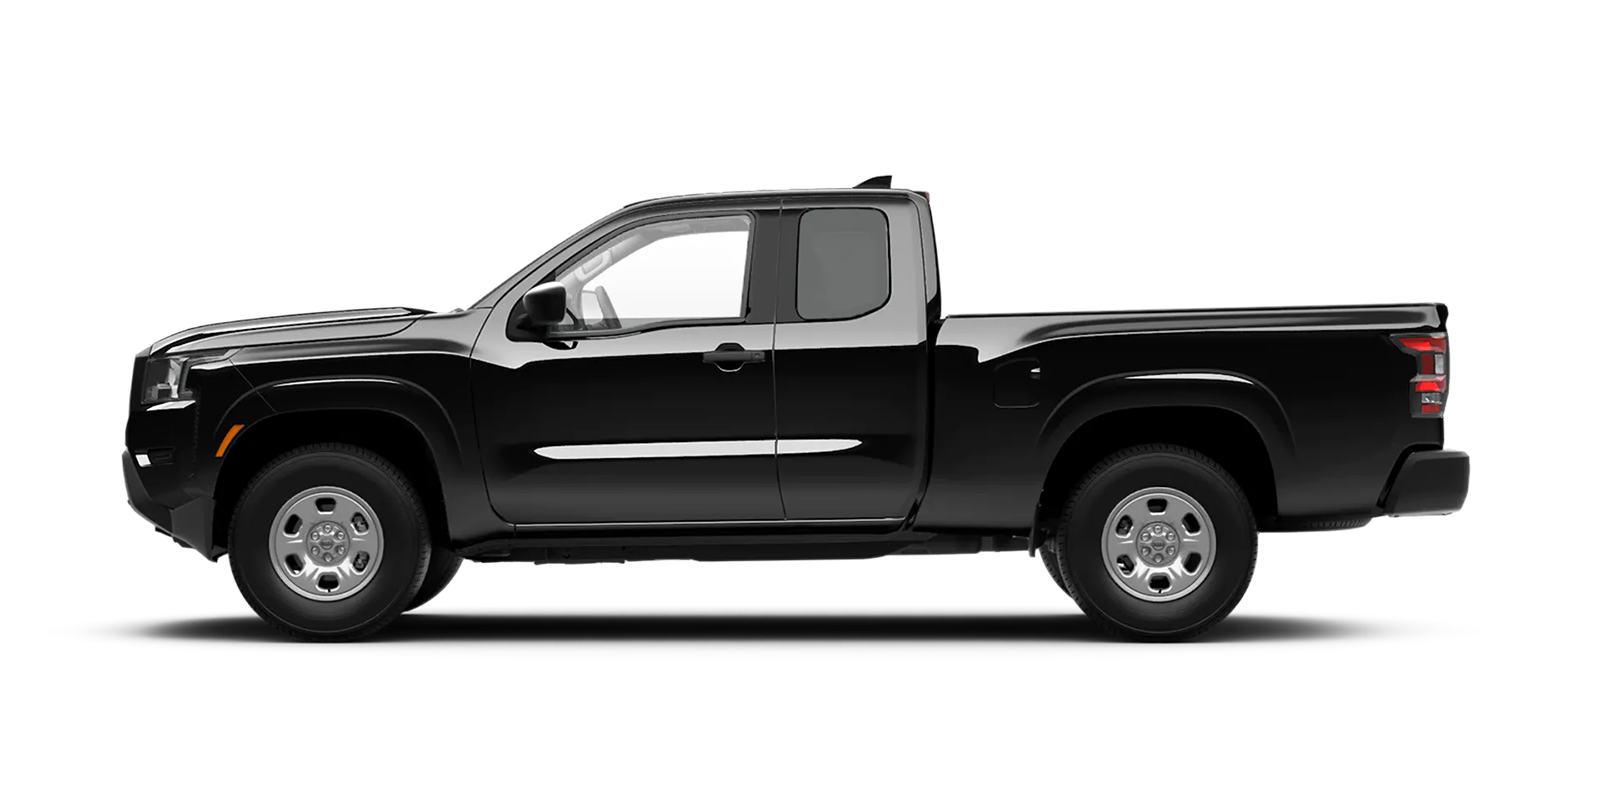 2022 Frontier King Cab S 4x4 in Super Black | Greenway Nissan of Florence in Florence AL